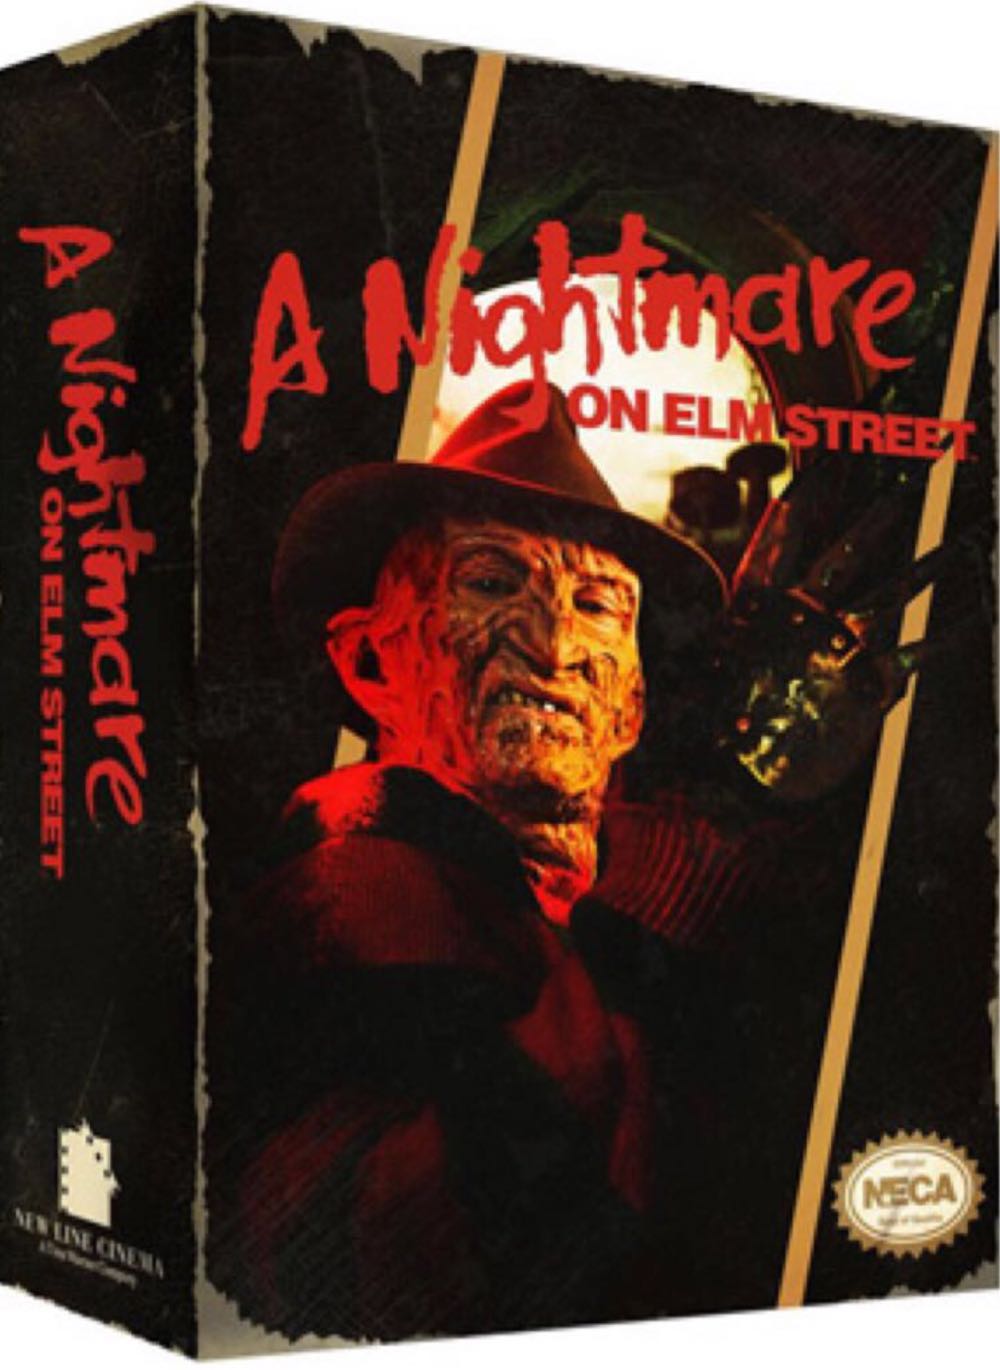 A Nightmare On Elm Street (Video Game Freddy) - Neca/Reel Toys (A Nightmare On Elm Street) action figure collectible - Main Image 1